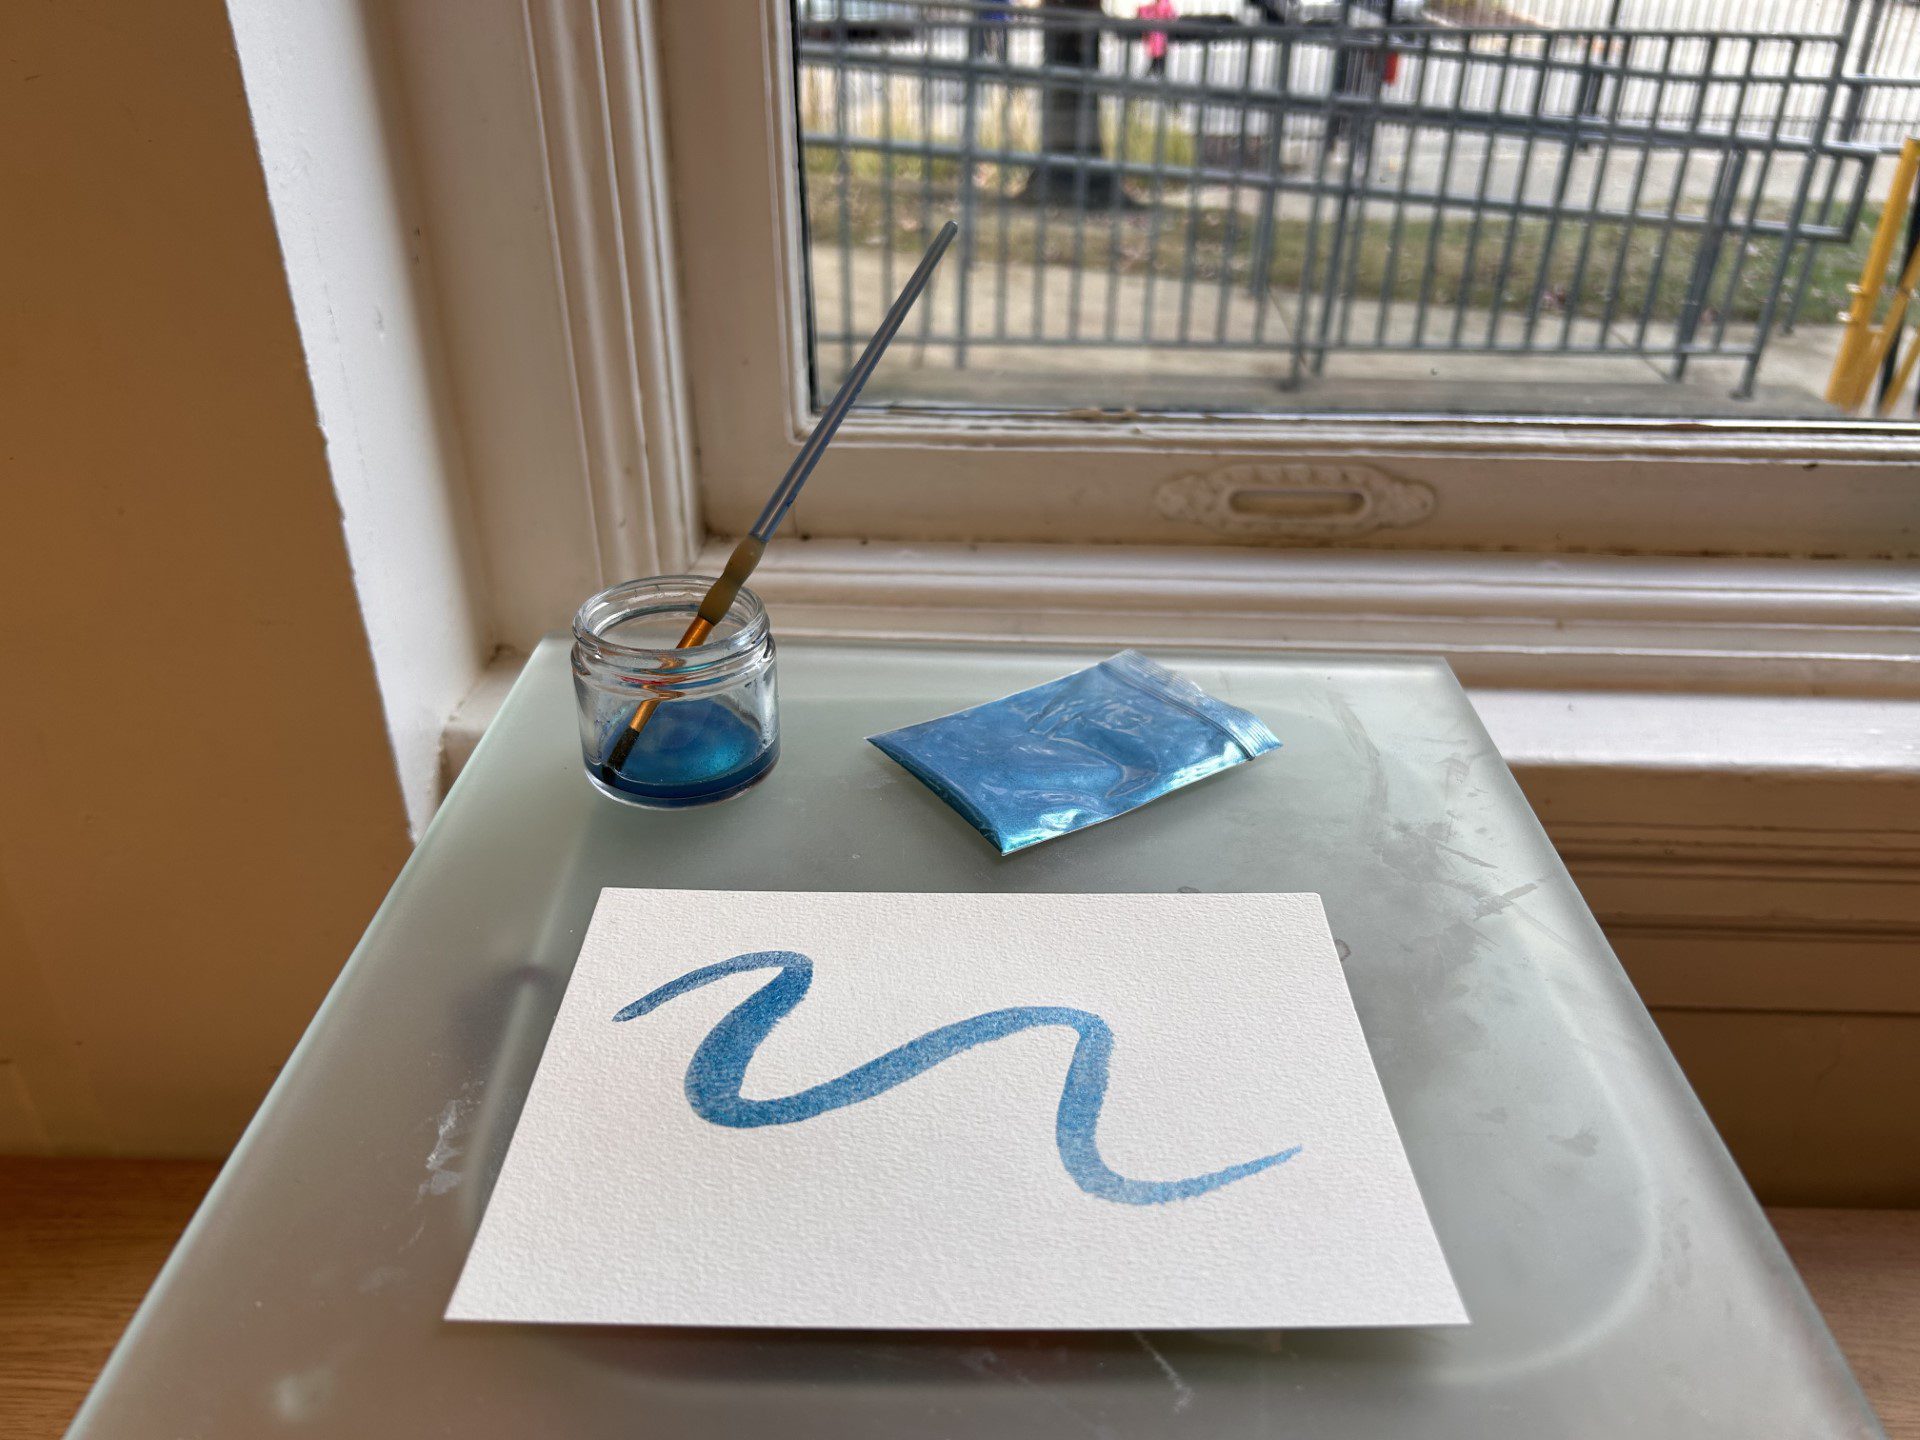 A piece of paper with a squiggly line of shimmery blue watercolor on it sites on a surface. Behind it are a small jar of the blue shimmery powder and blue shimmery liquid with a paintbrush in it.